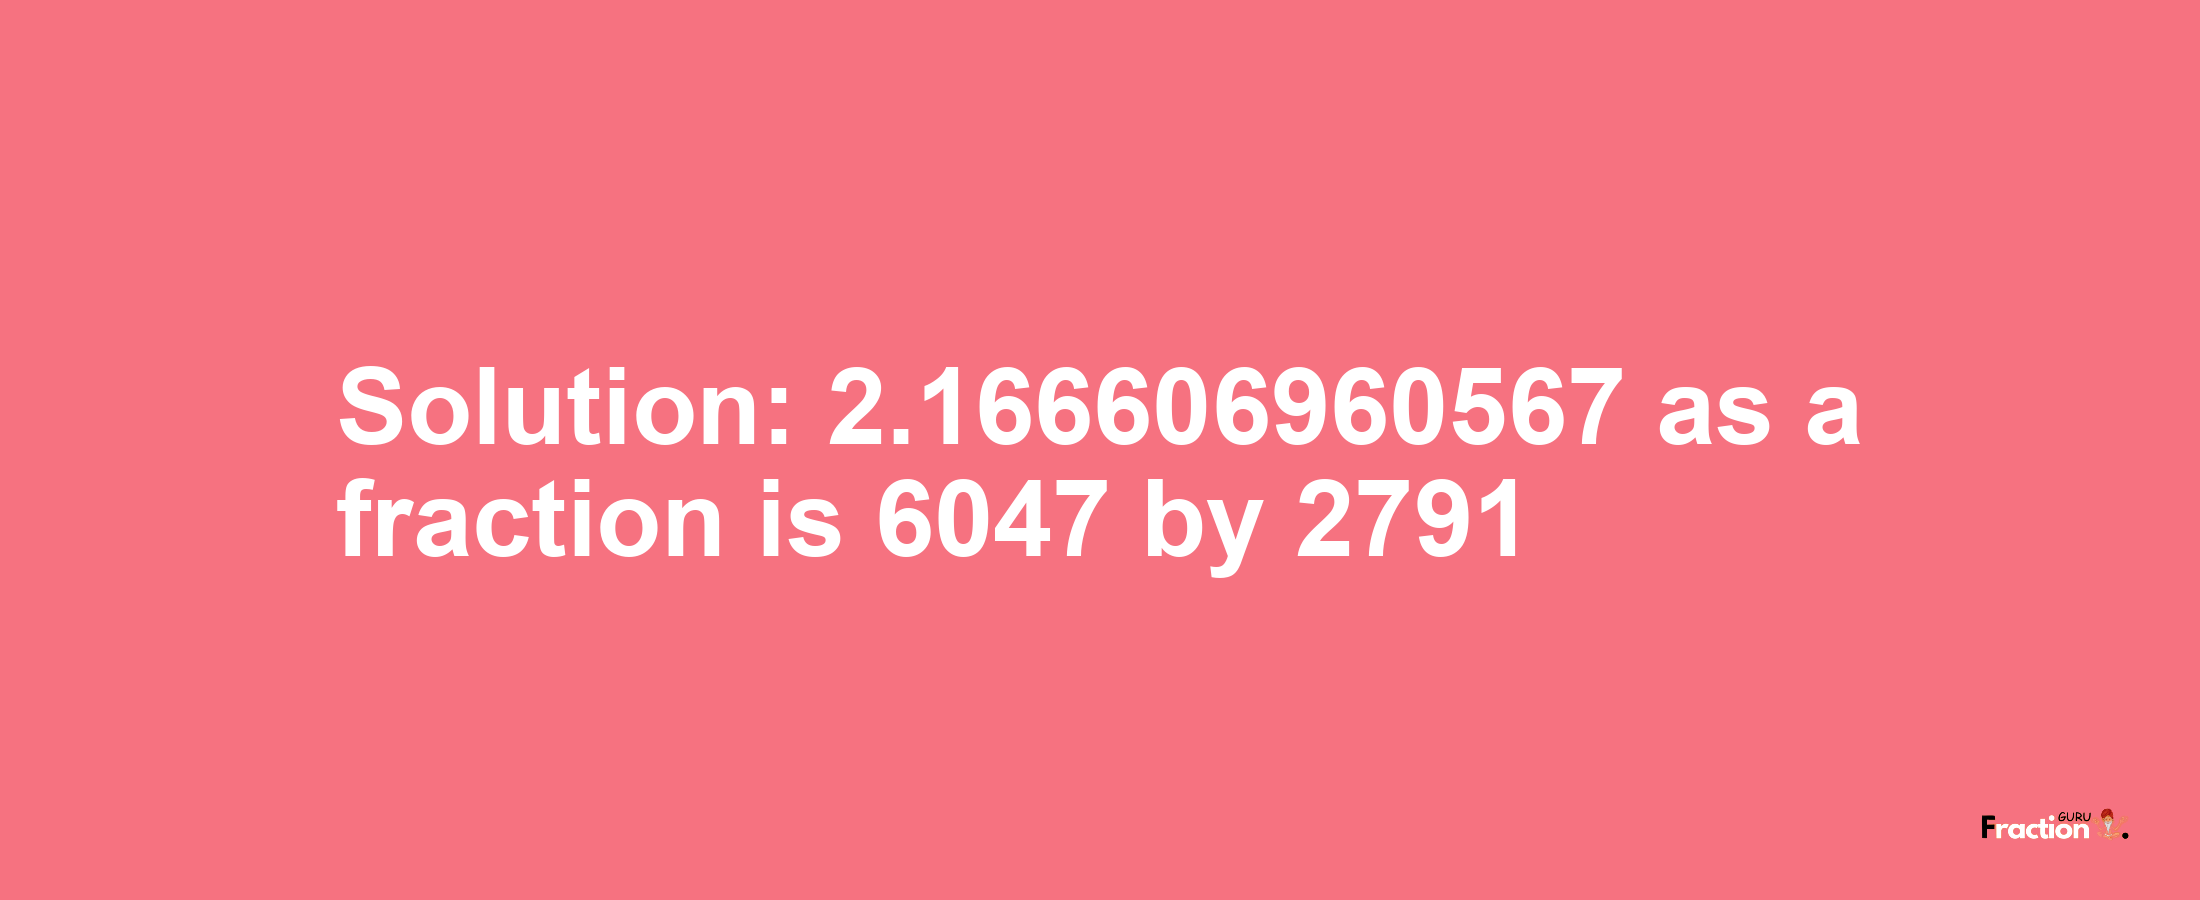 Solution:2.166606960567 as a fraction is 6047/2791